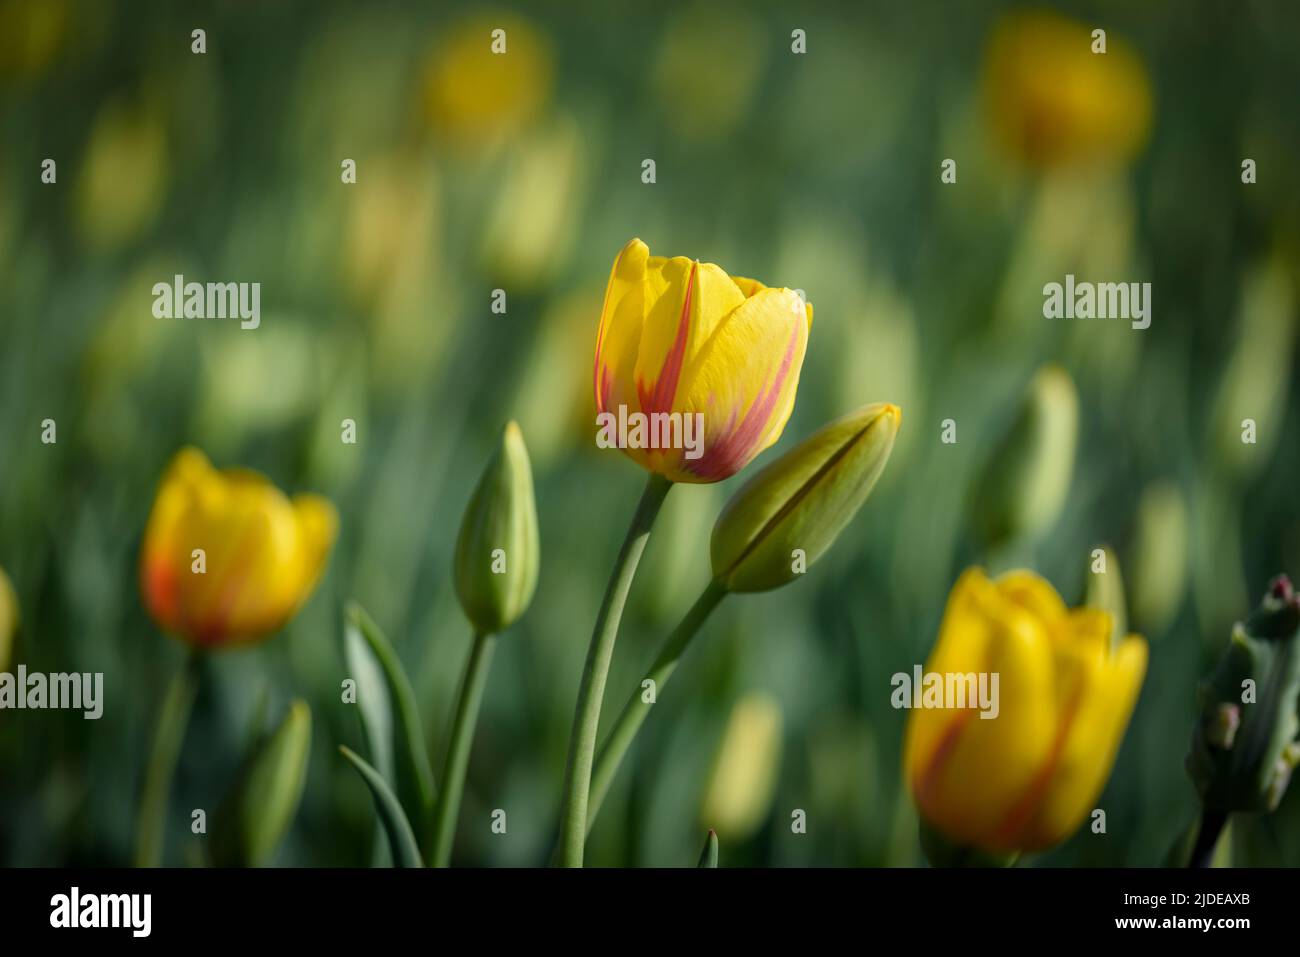 View of yellow tulips some blossomed some coming to bloom on blurred background. Stock Photo